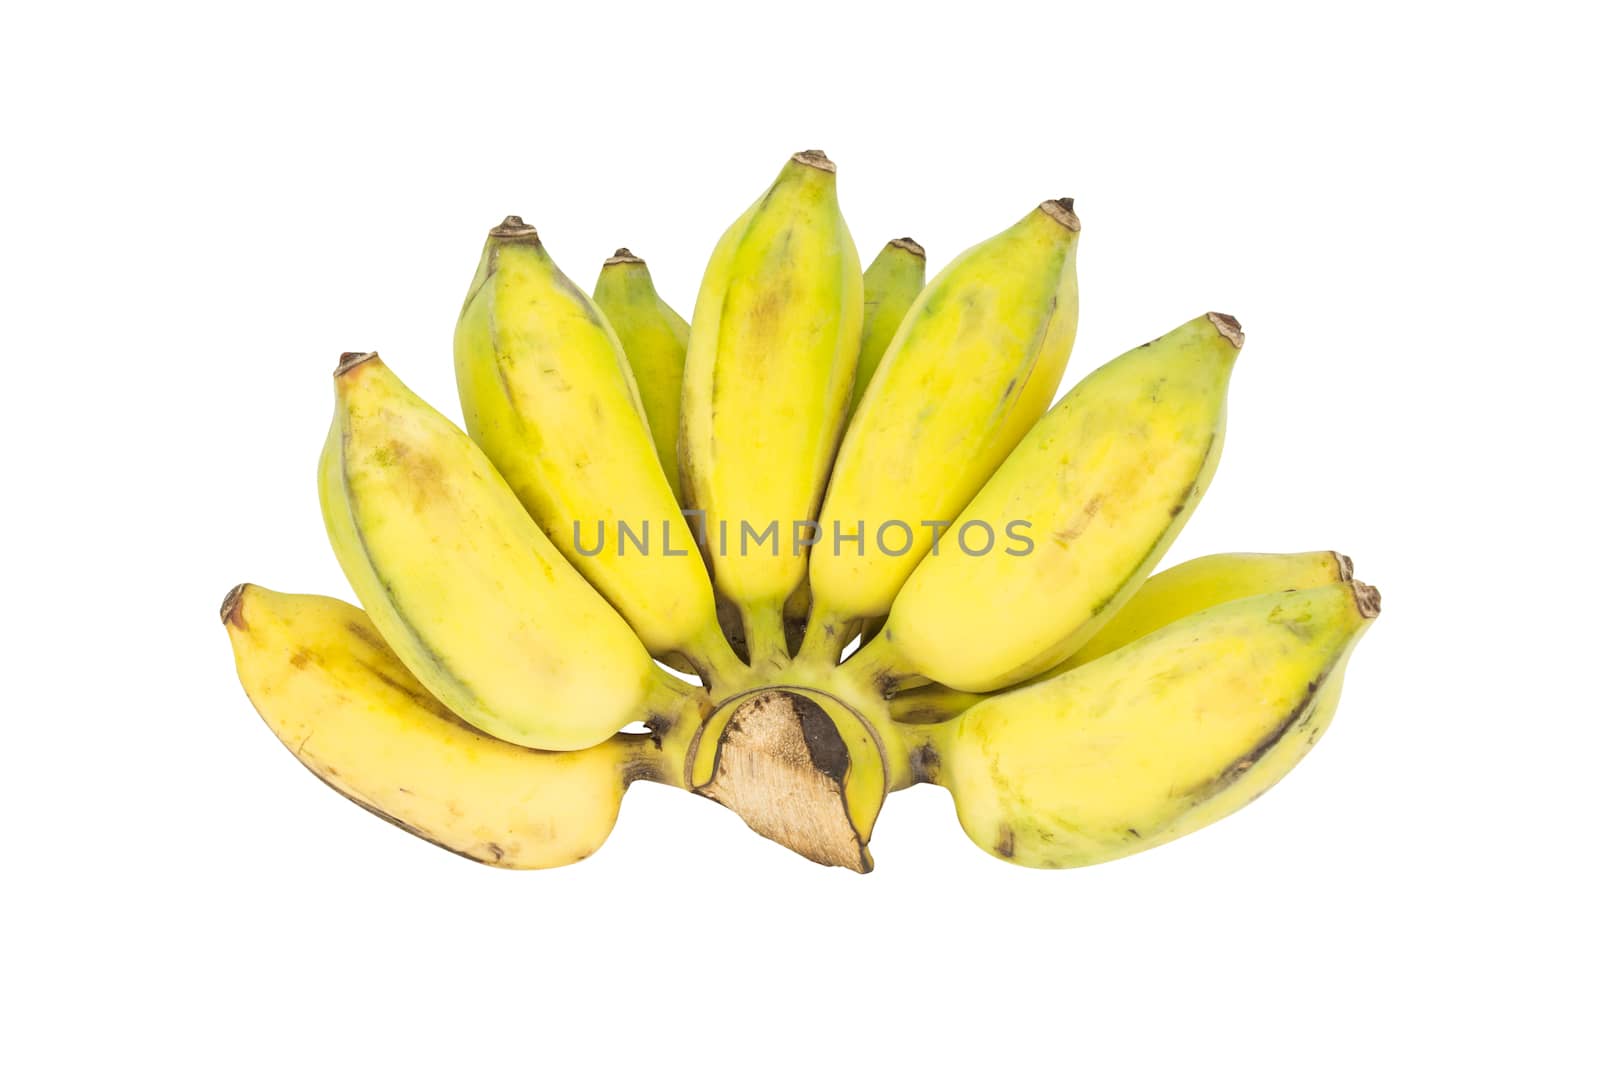 Bunch of bananas on white background by vitawin